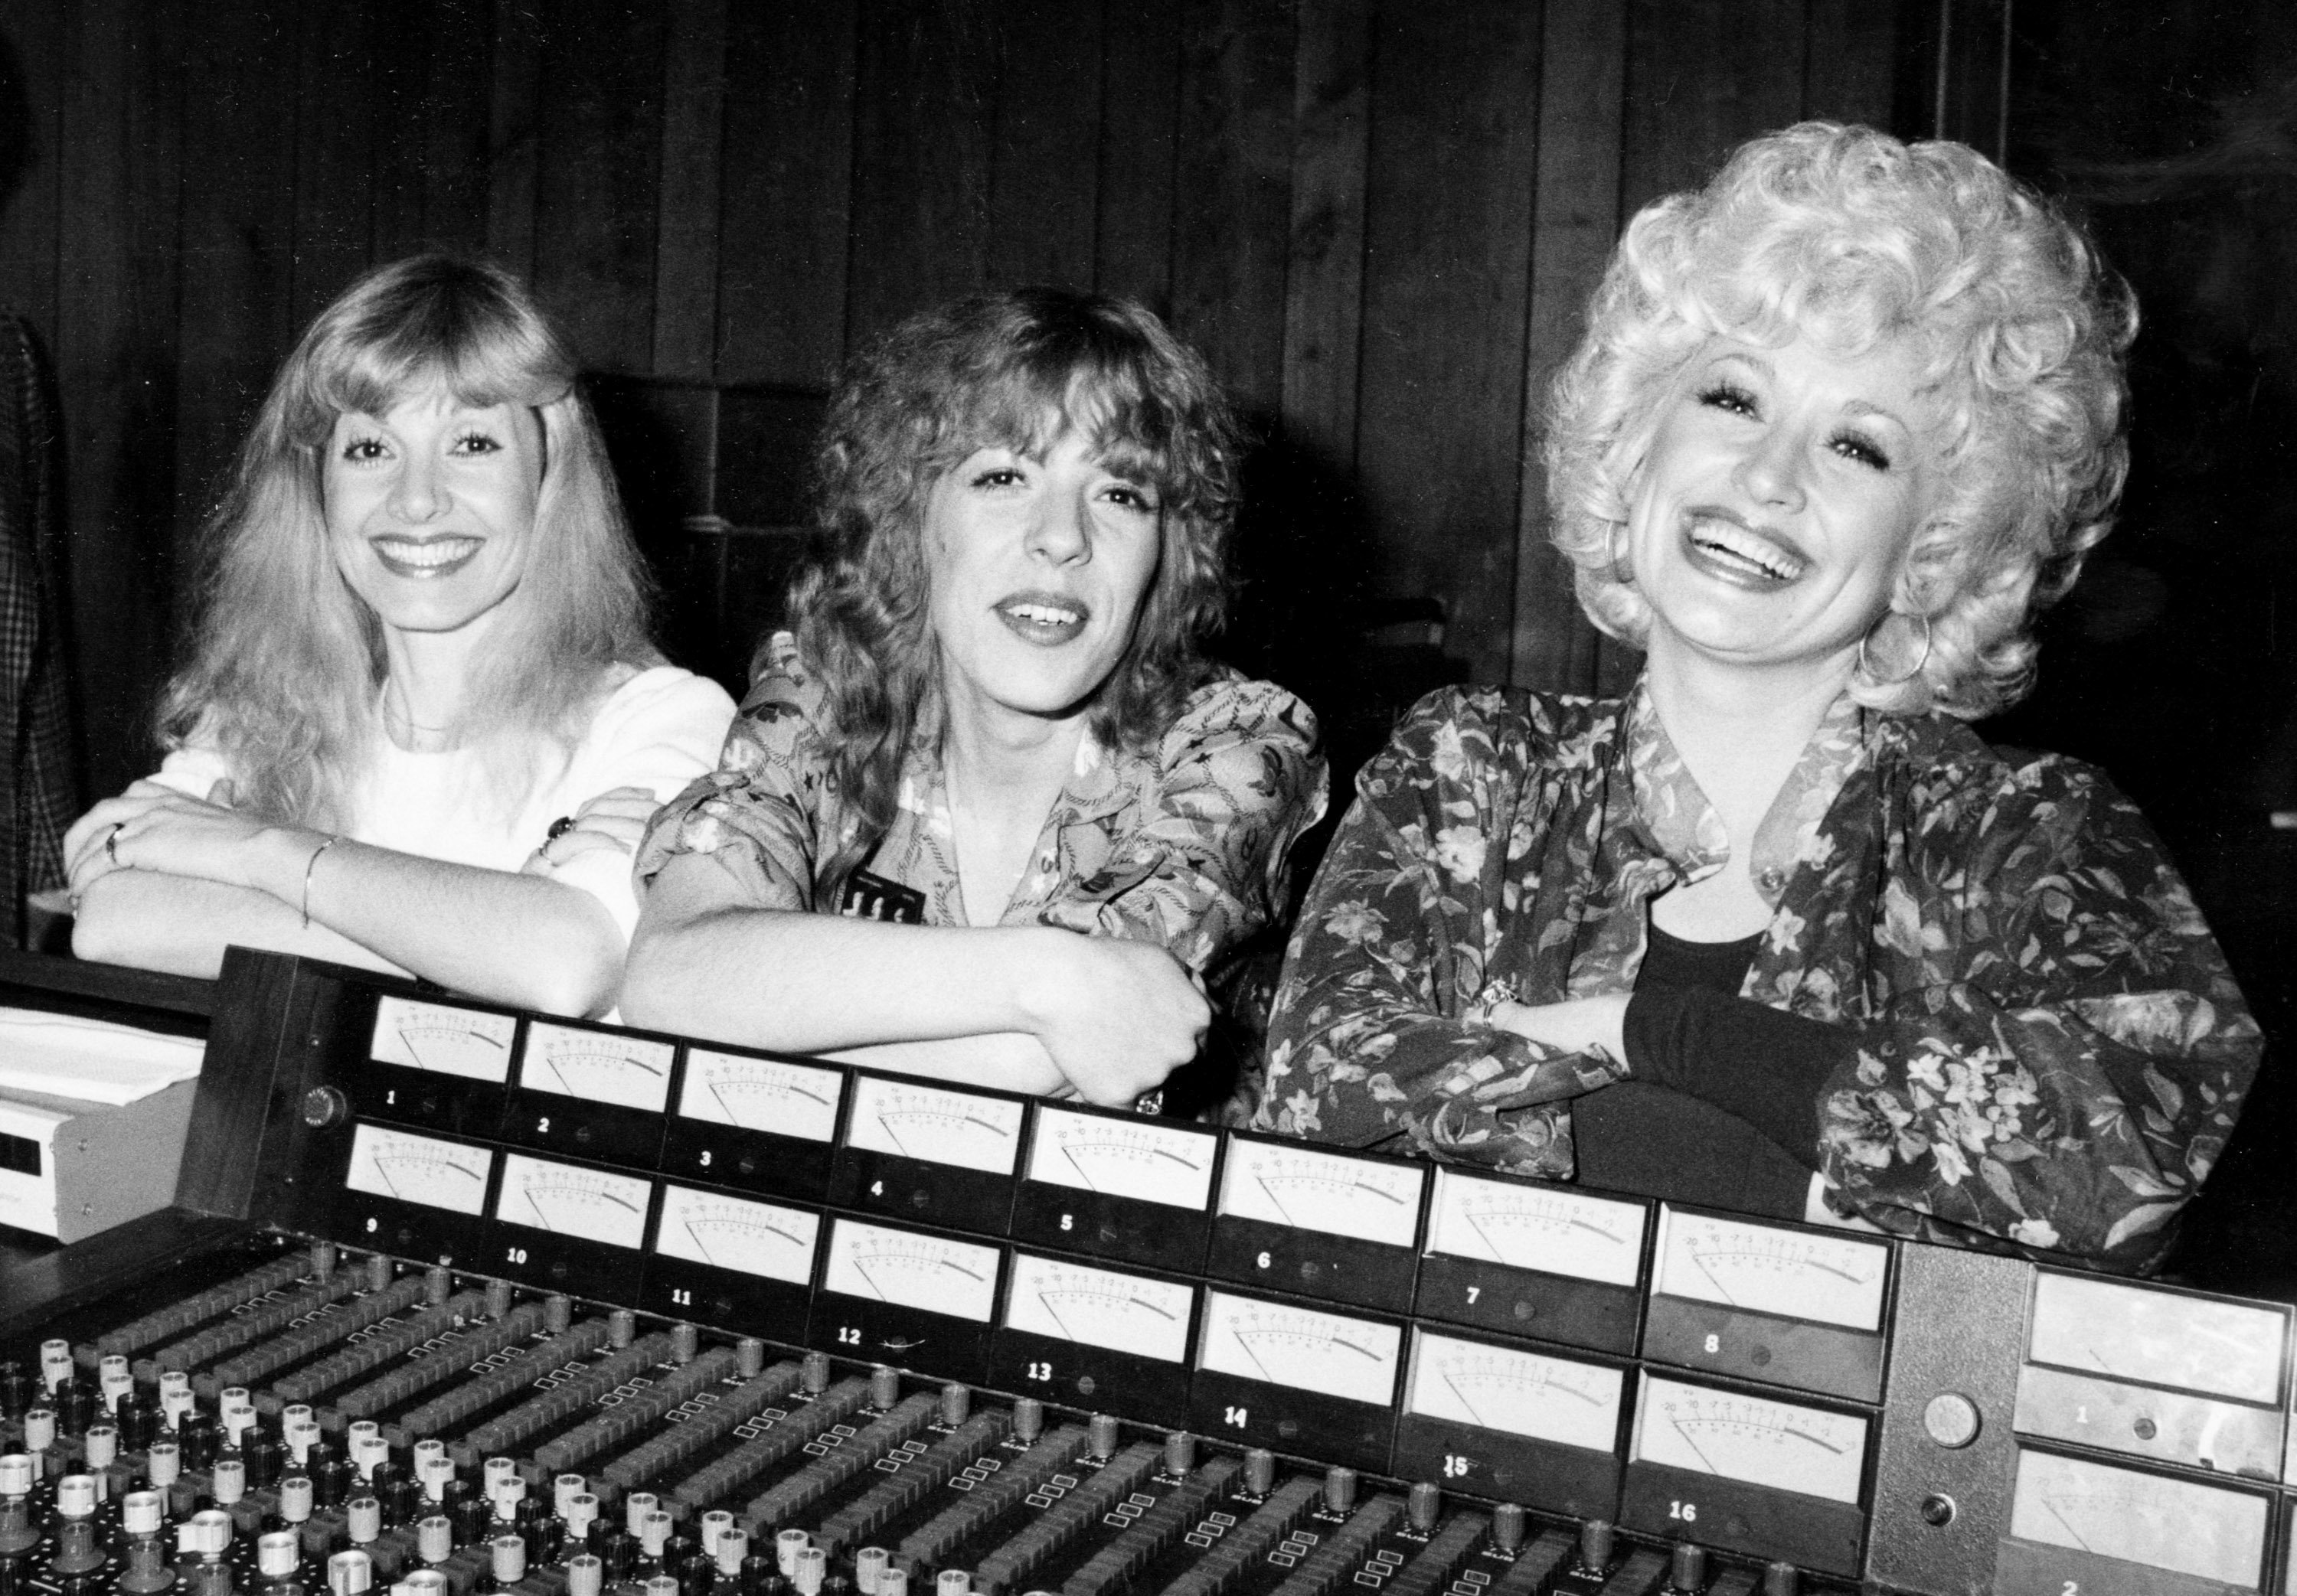 After Dolly Parton and Siblings Left Home, Mom and Dad 'Realized They  Didn't Have That Much in Common'